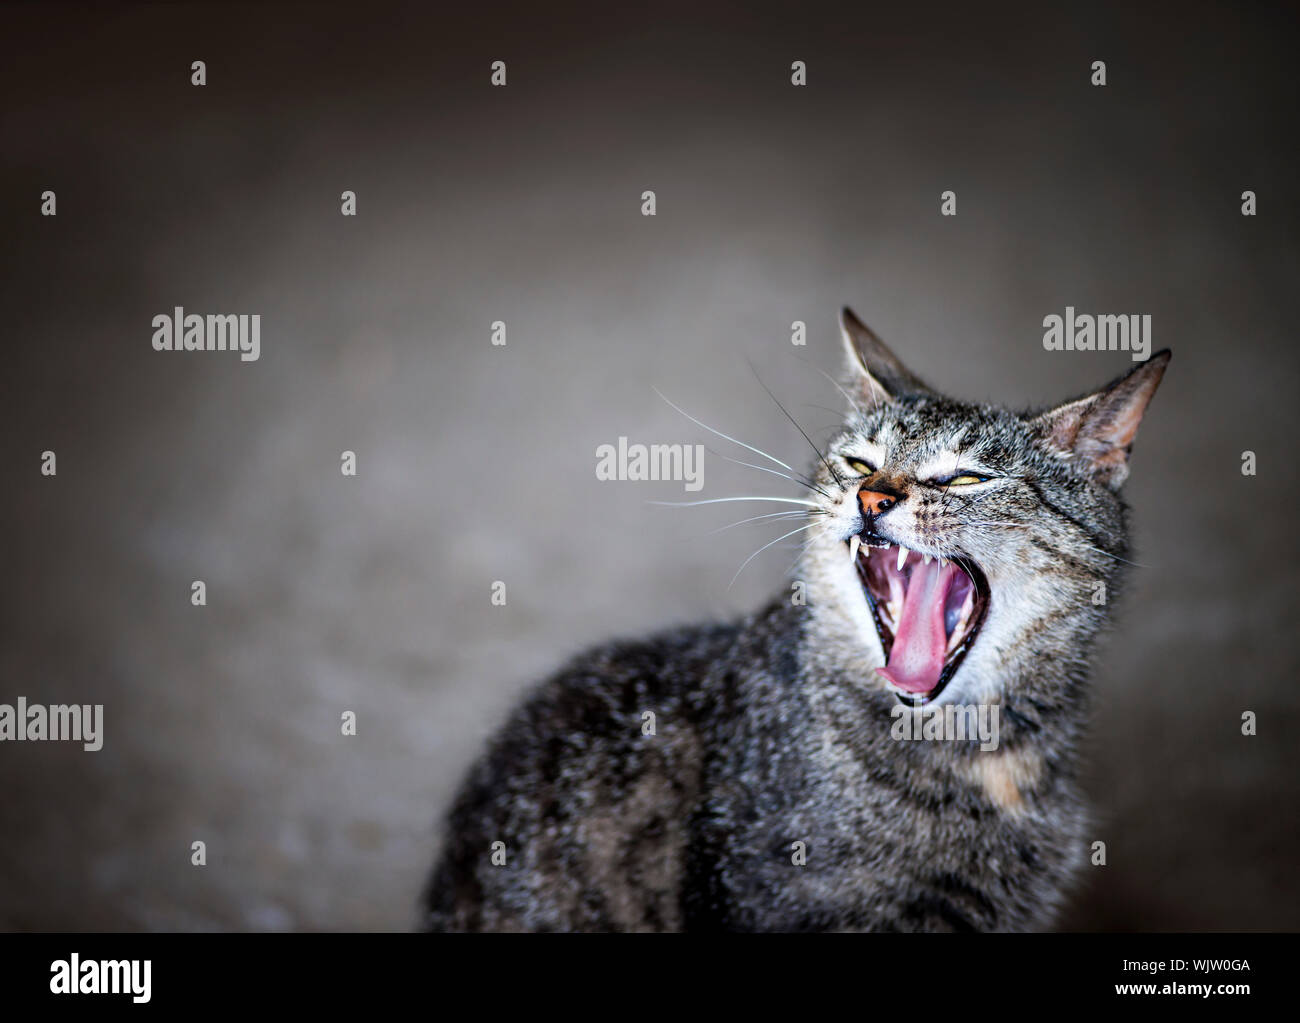 Gray pet cat meowing or yawning with mouth wide open on grey background and copy space Stock Photo